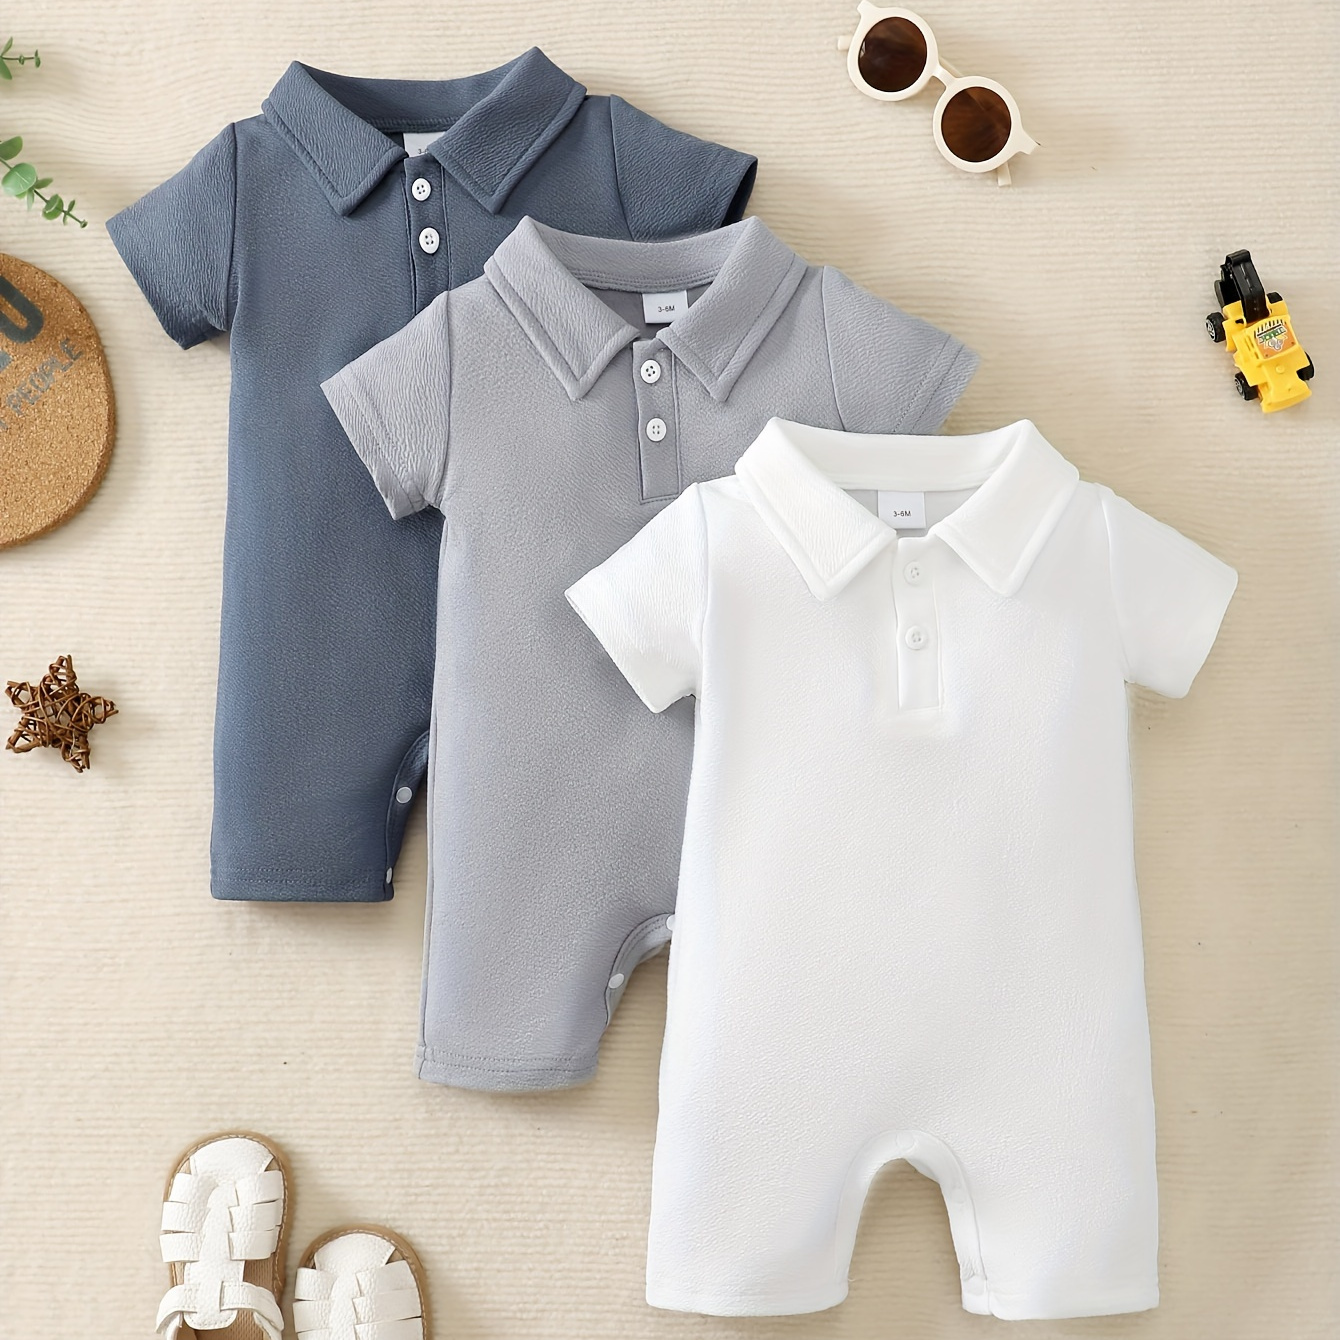 

3pcs Baby's Solid Color Turndown Collar Bodysuit, Casual Short Sleeve Romper, Toddler & Infant Boy's Clothing